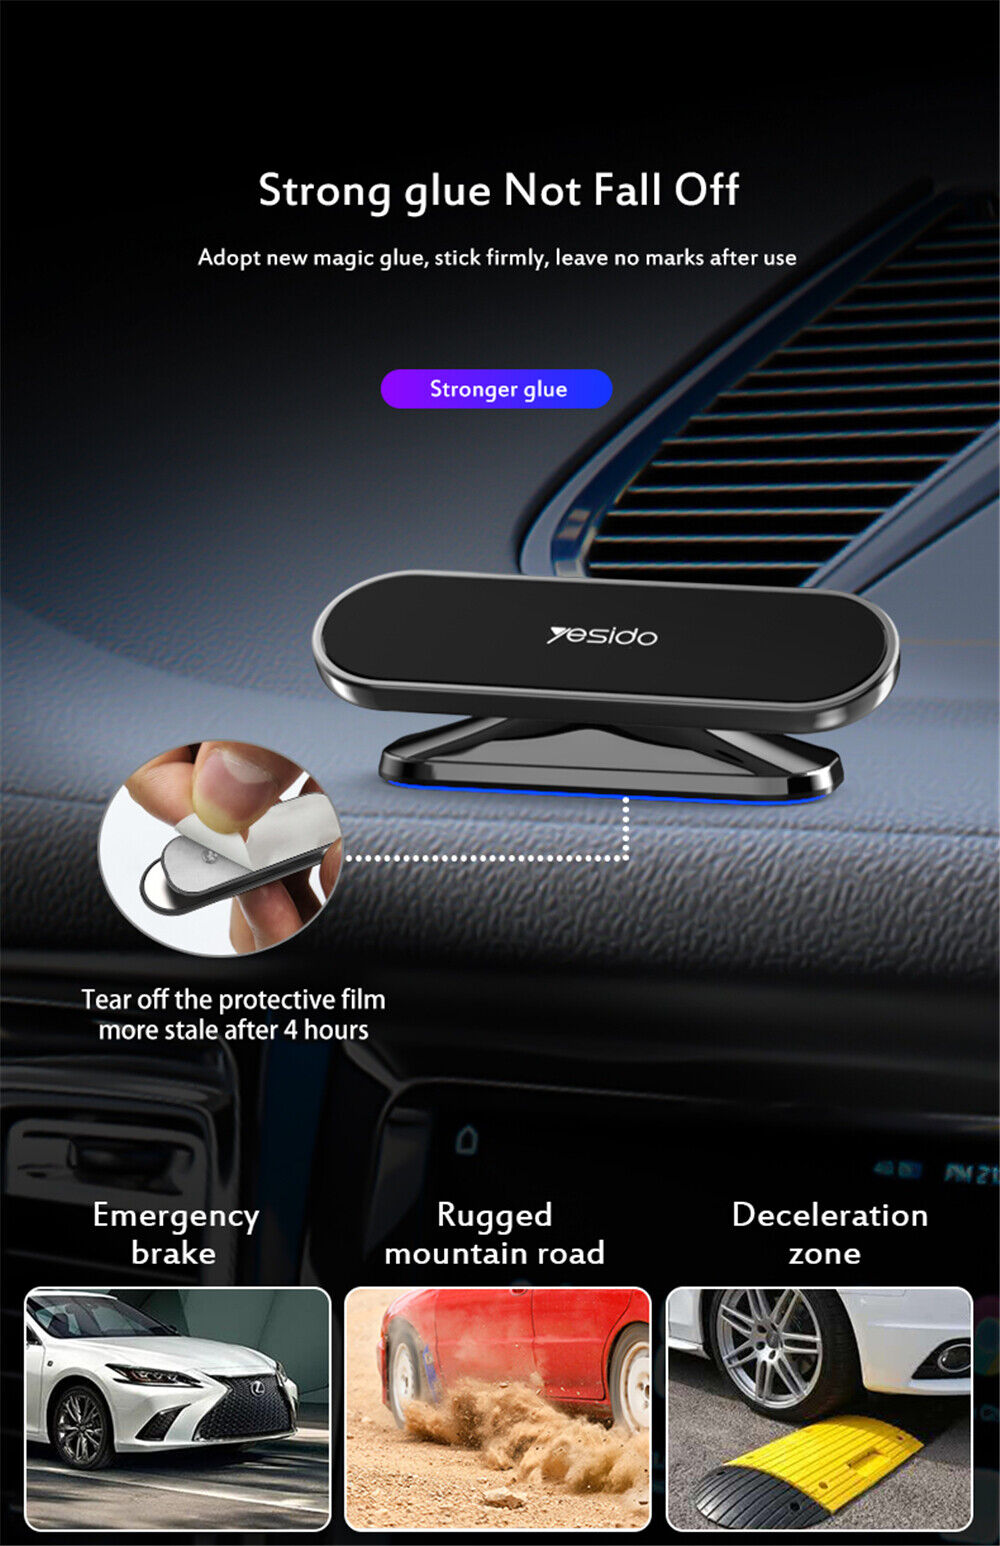 360¡ã Rotate Universal Magnetic Car Mount Dash Phone Holder for iPhone Galaxy GPS